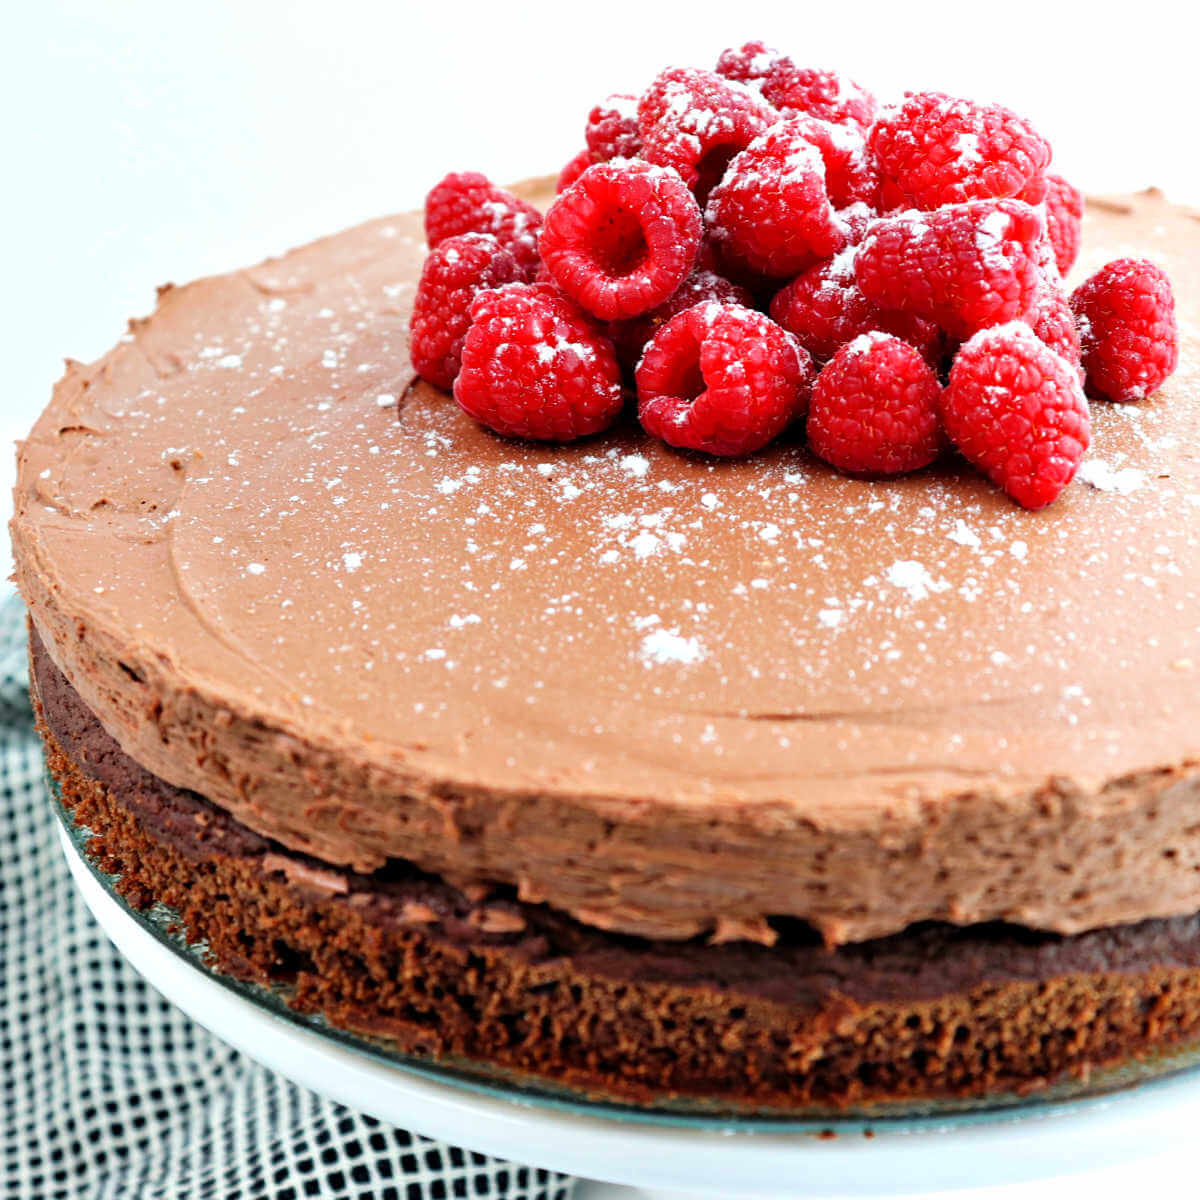 Keto chocolate mousse cake is divinely decadent yet gluten-free and sugar-free. Perfect for a holiday dessert or special occasion. #ketodessert #ketochristmas #lowcarbcake